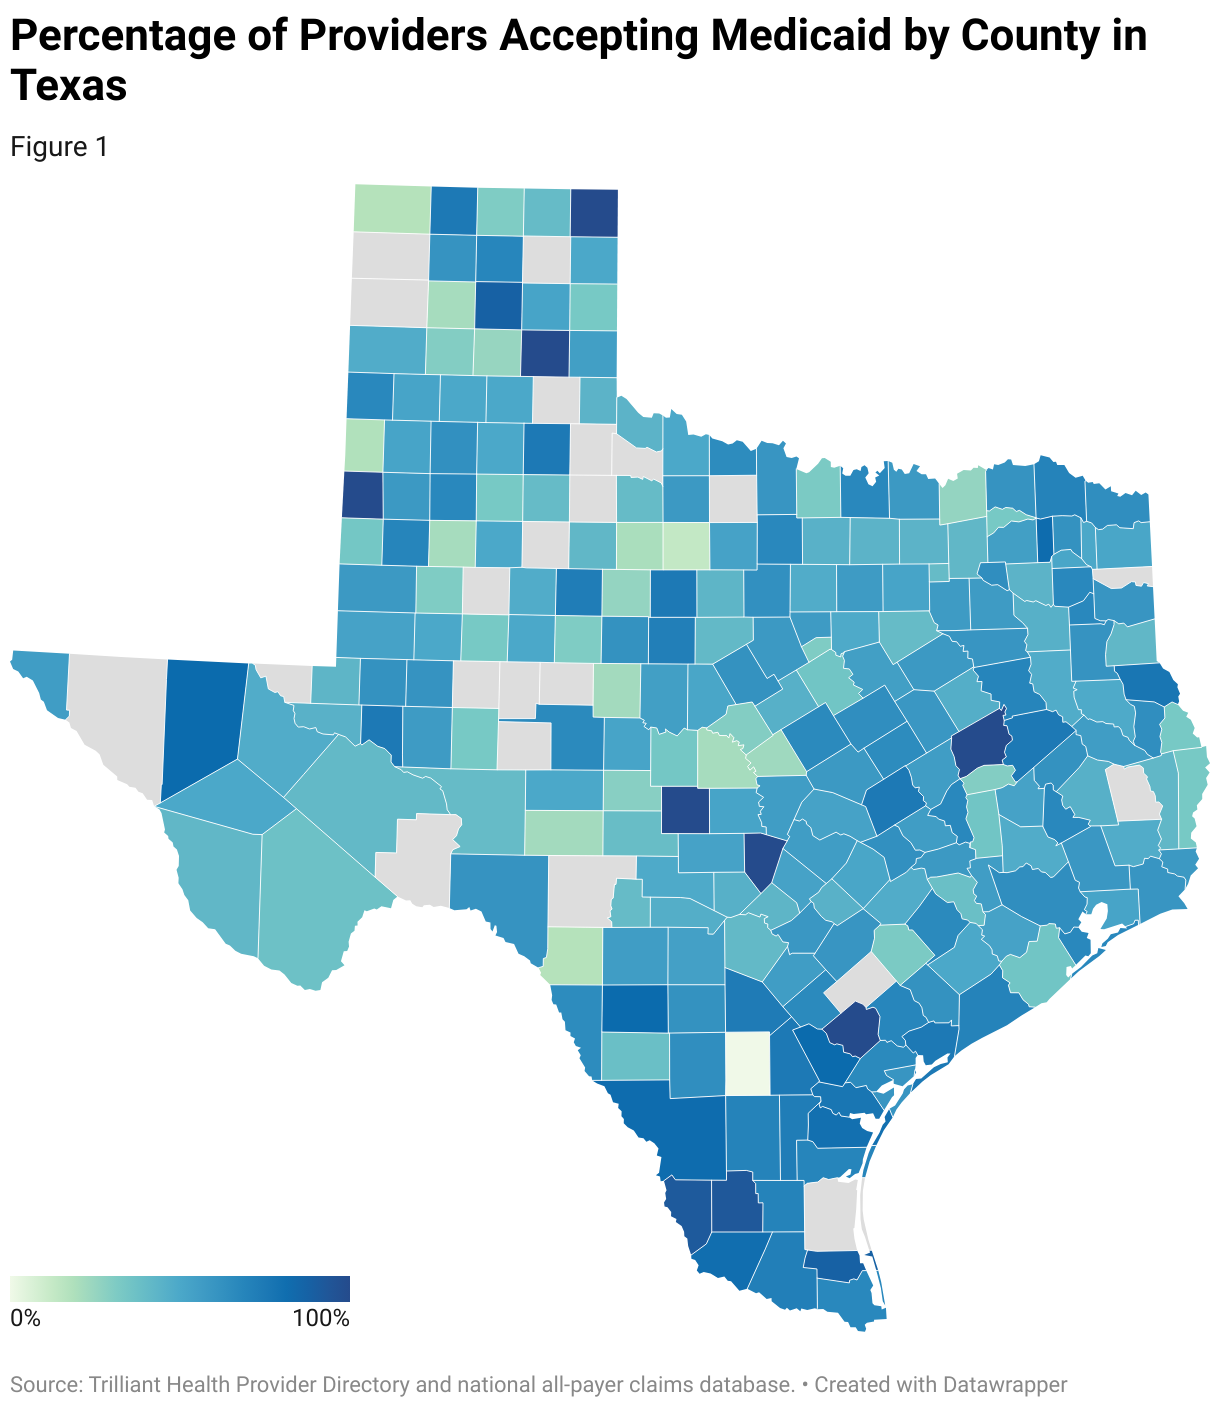 A choropleth map of Texas that shows the percentage of providers in each county that serve Medicaid populations. Some areas on the map have a high percentage, while others are as low as 25%.